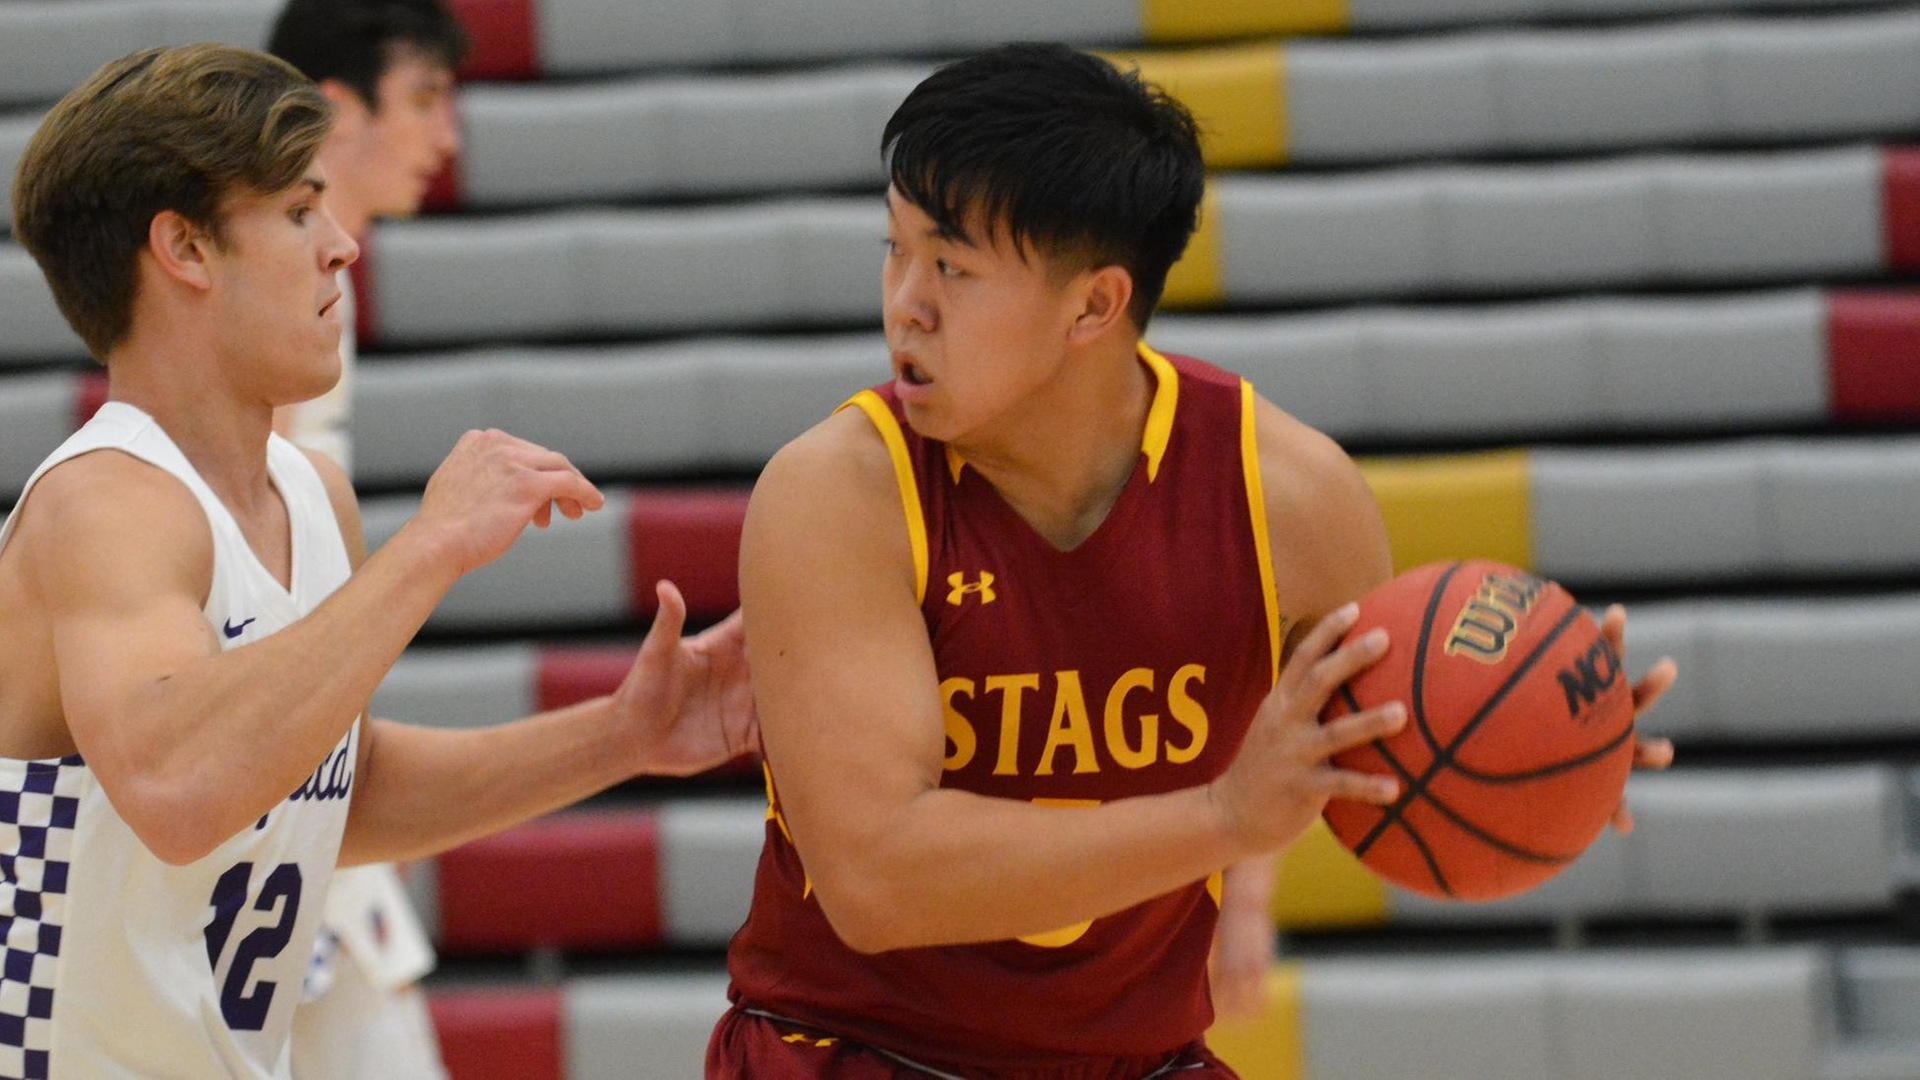 Charles Meng had a career high 13 points for CMS